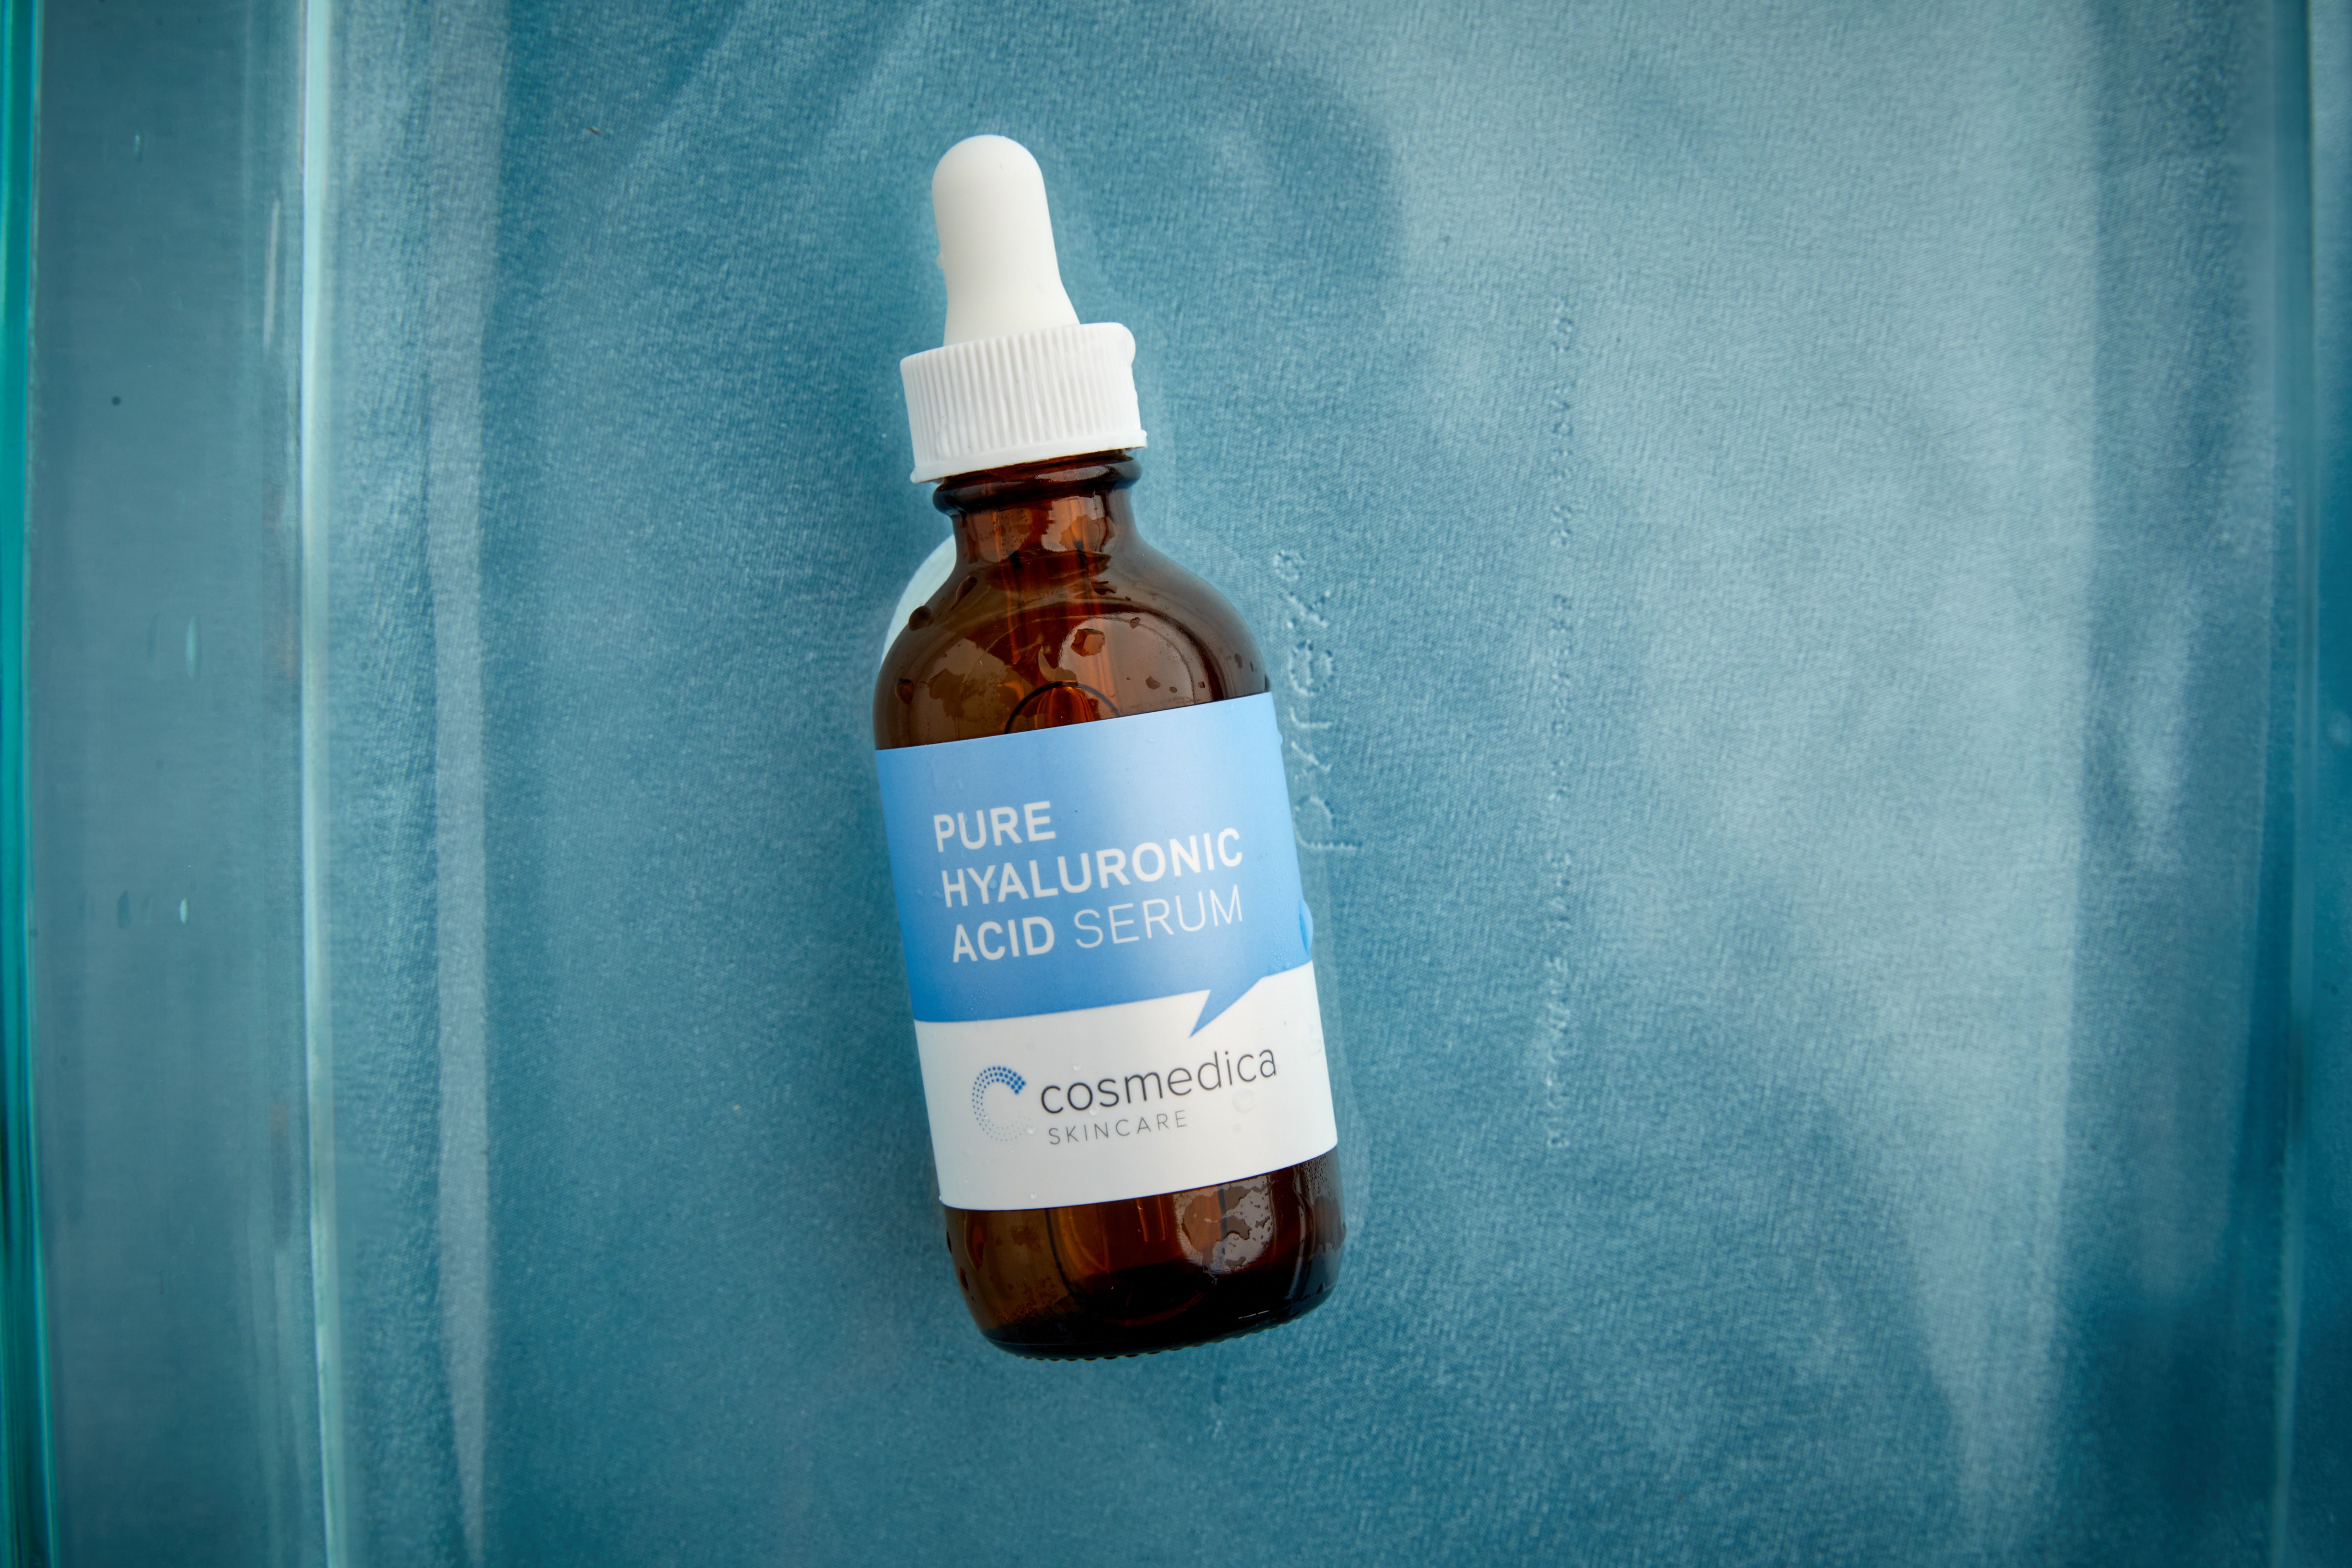 Can Hyaluronic Acid Cause Acne?